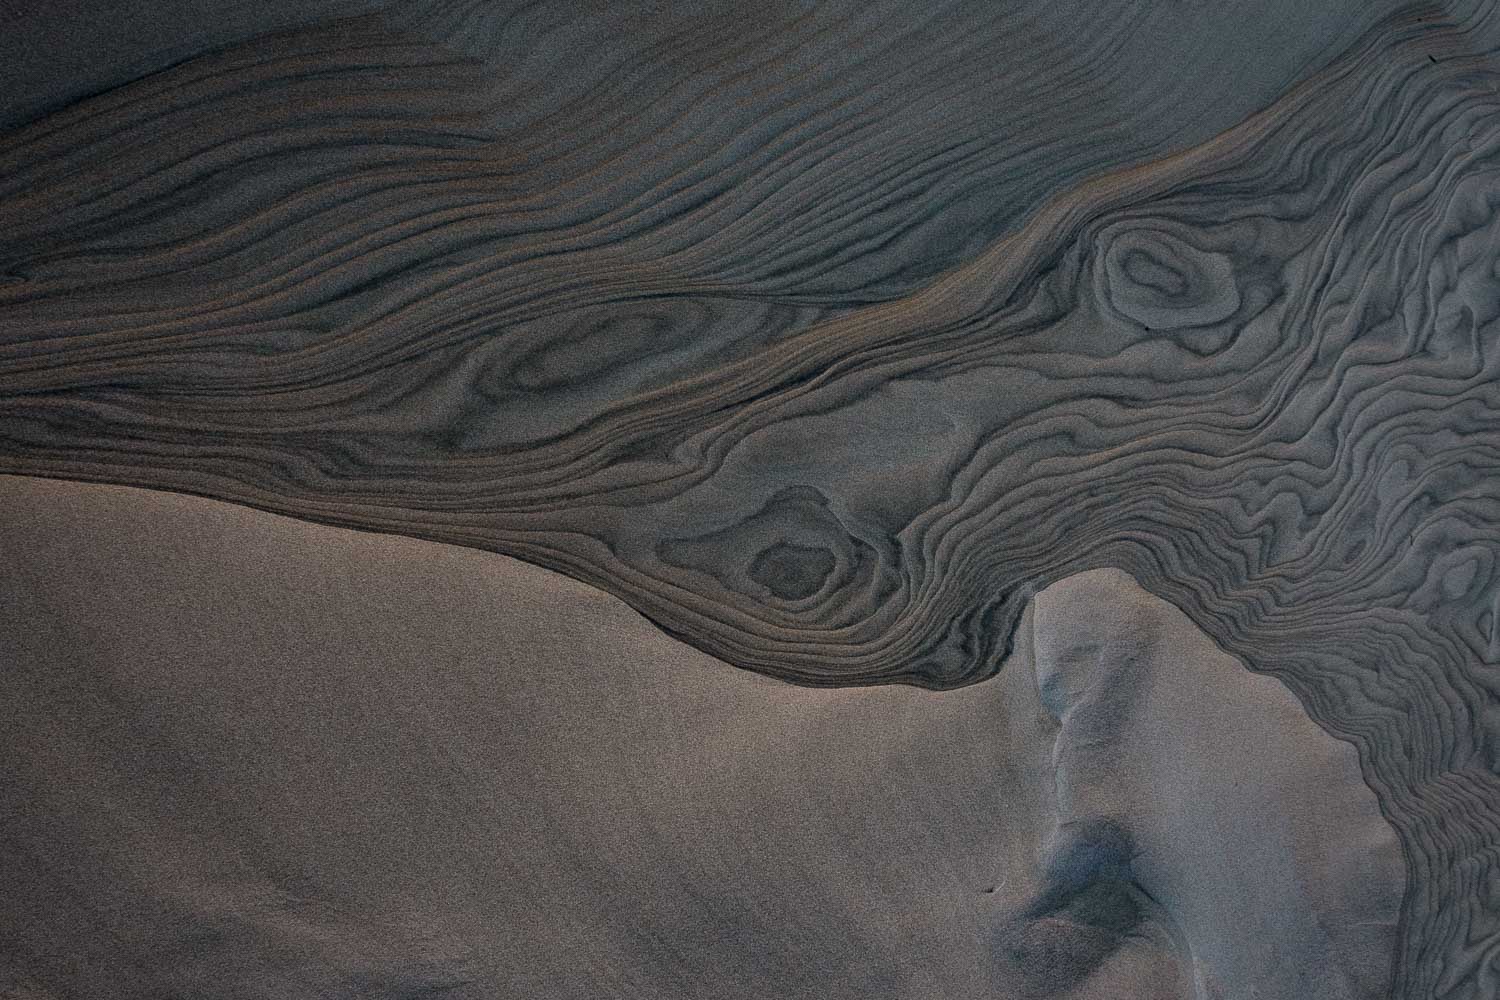 Abstract patterns and textures in sand.